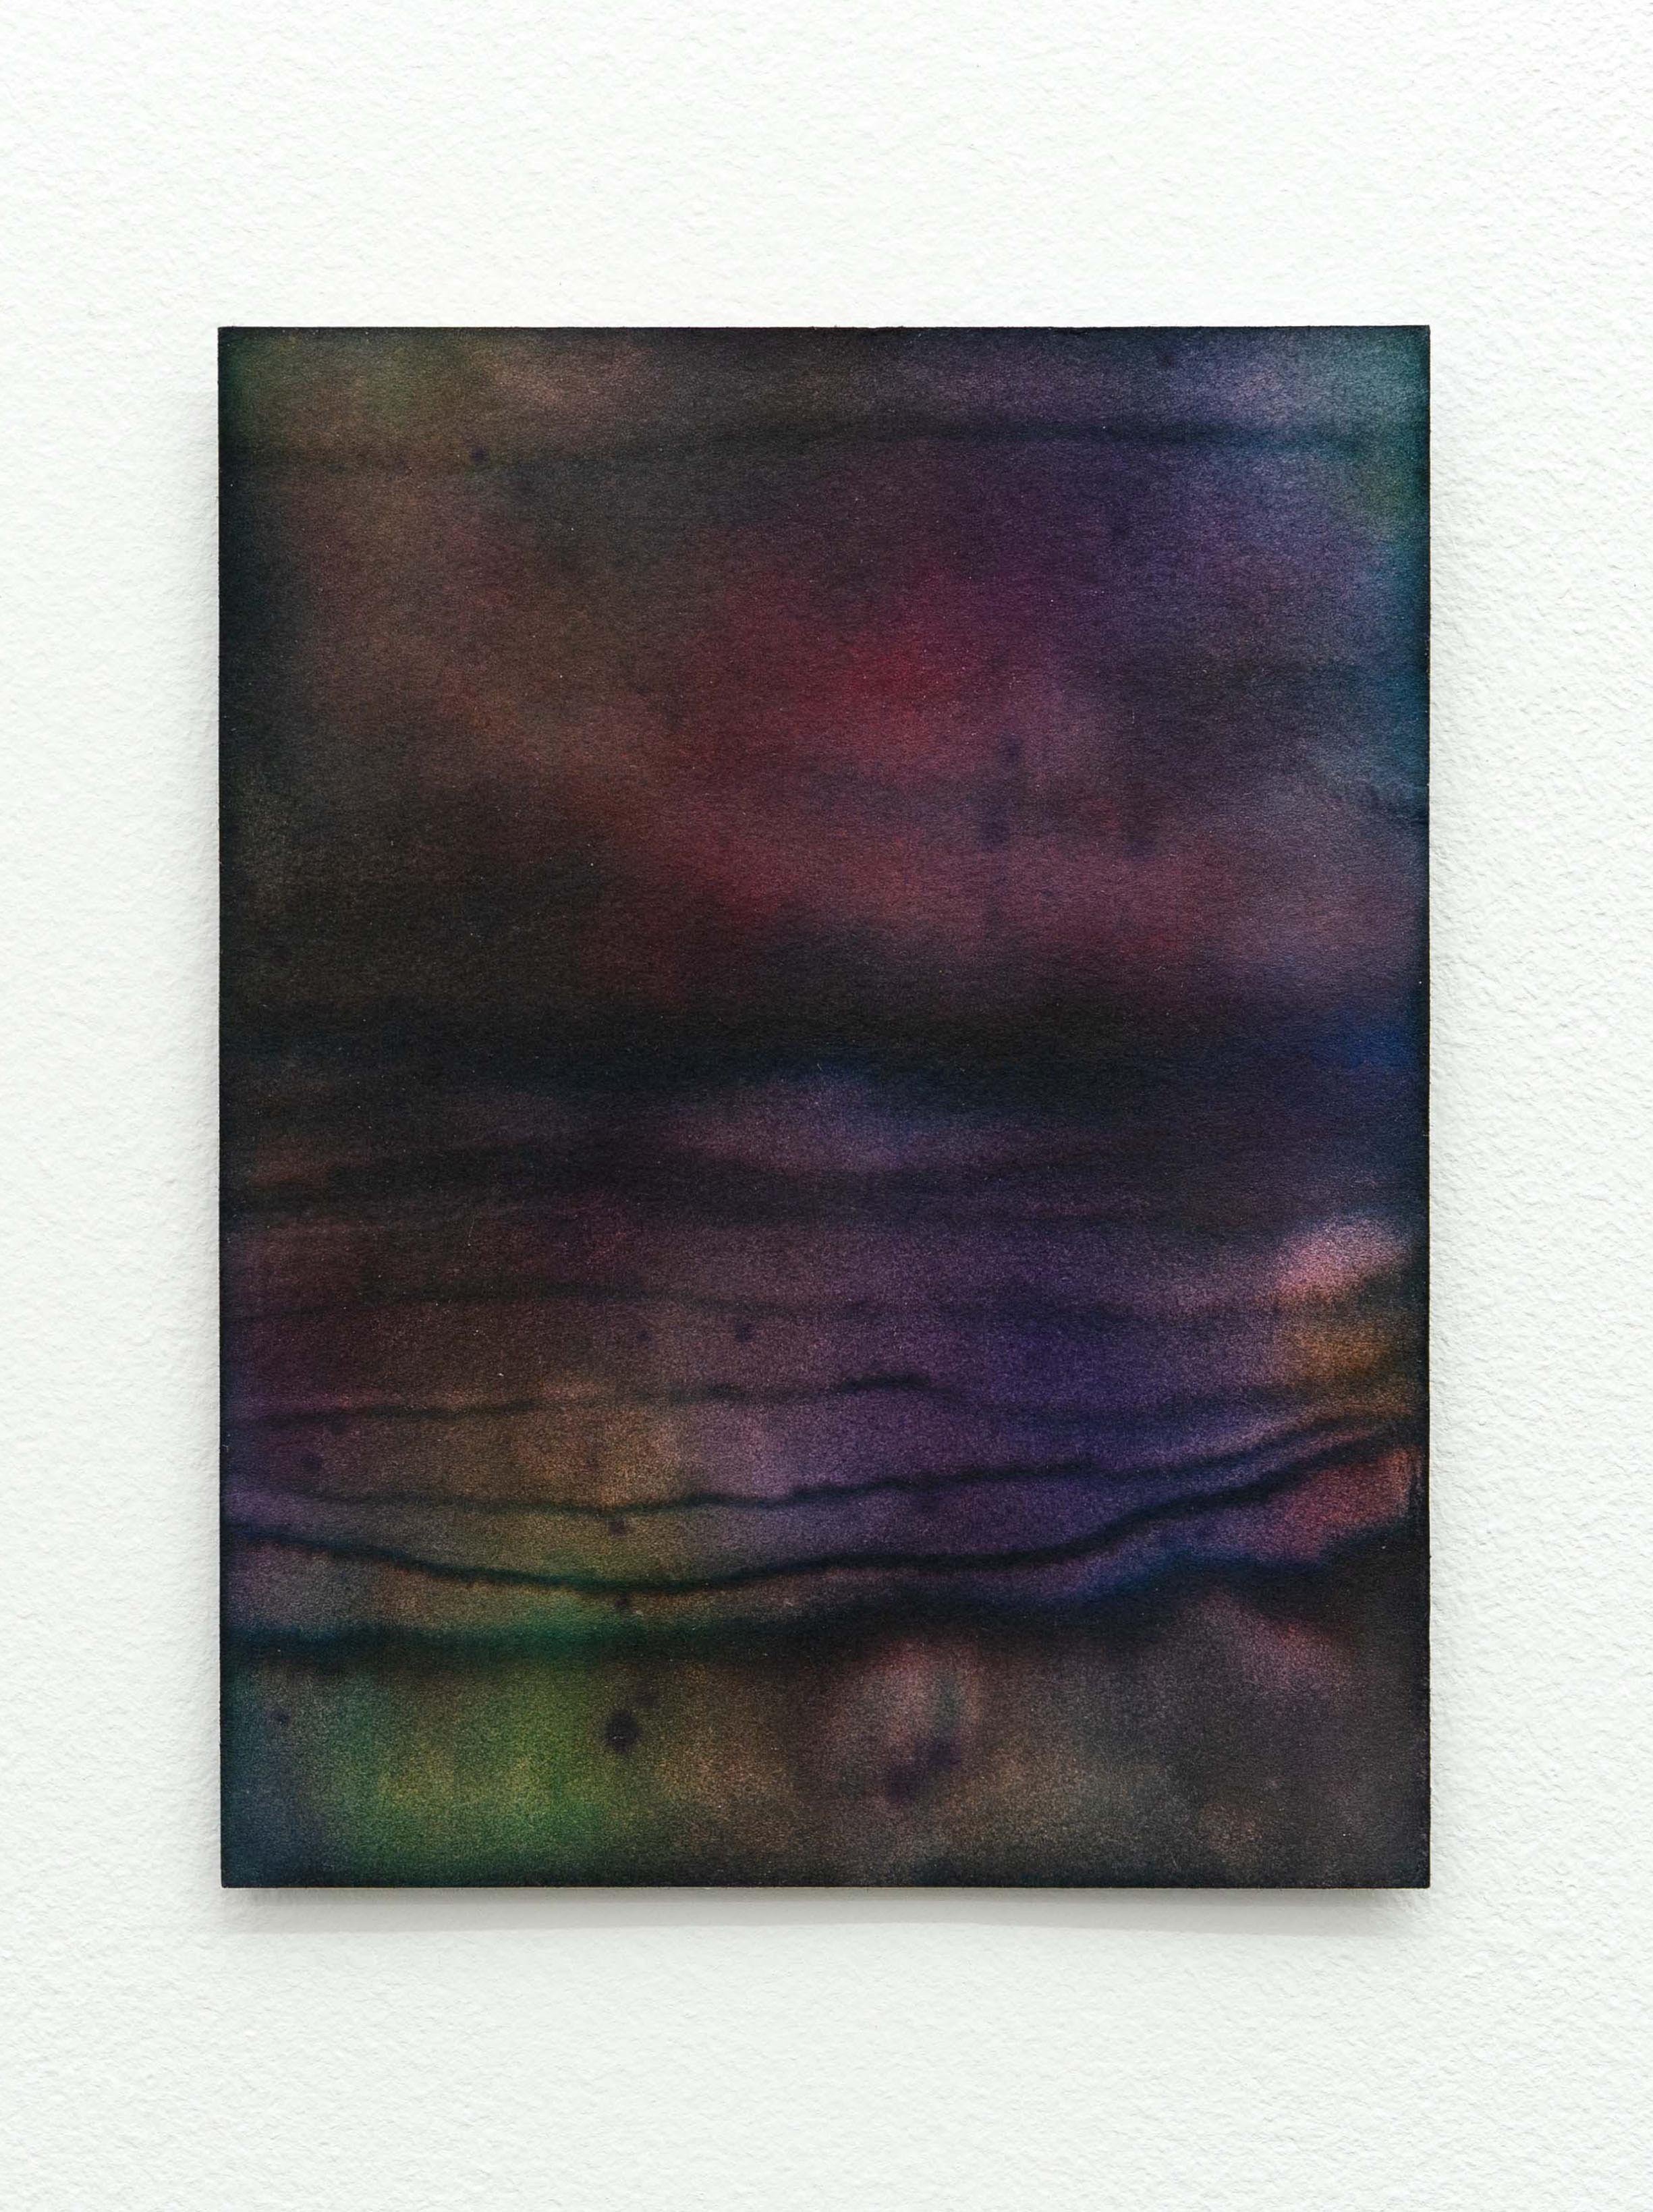  Nocturne (March 16 2022), 2023, ink and watercolor on chromatography paper soaked in vodka solution, 4.3 x 5.5 inches 